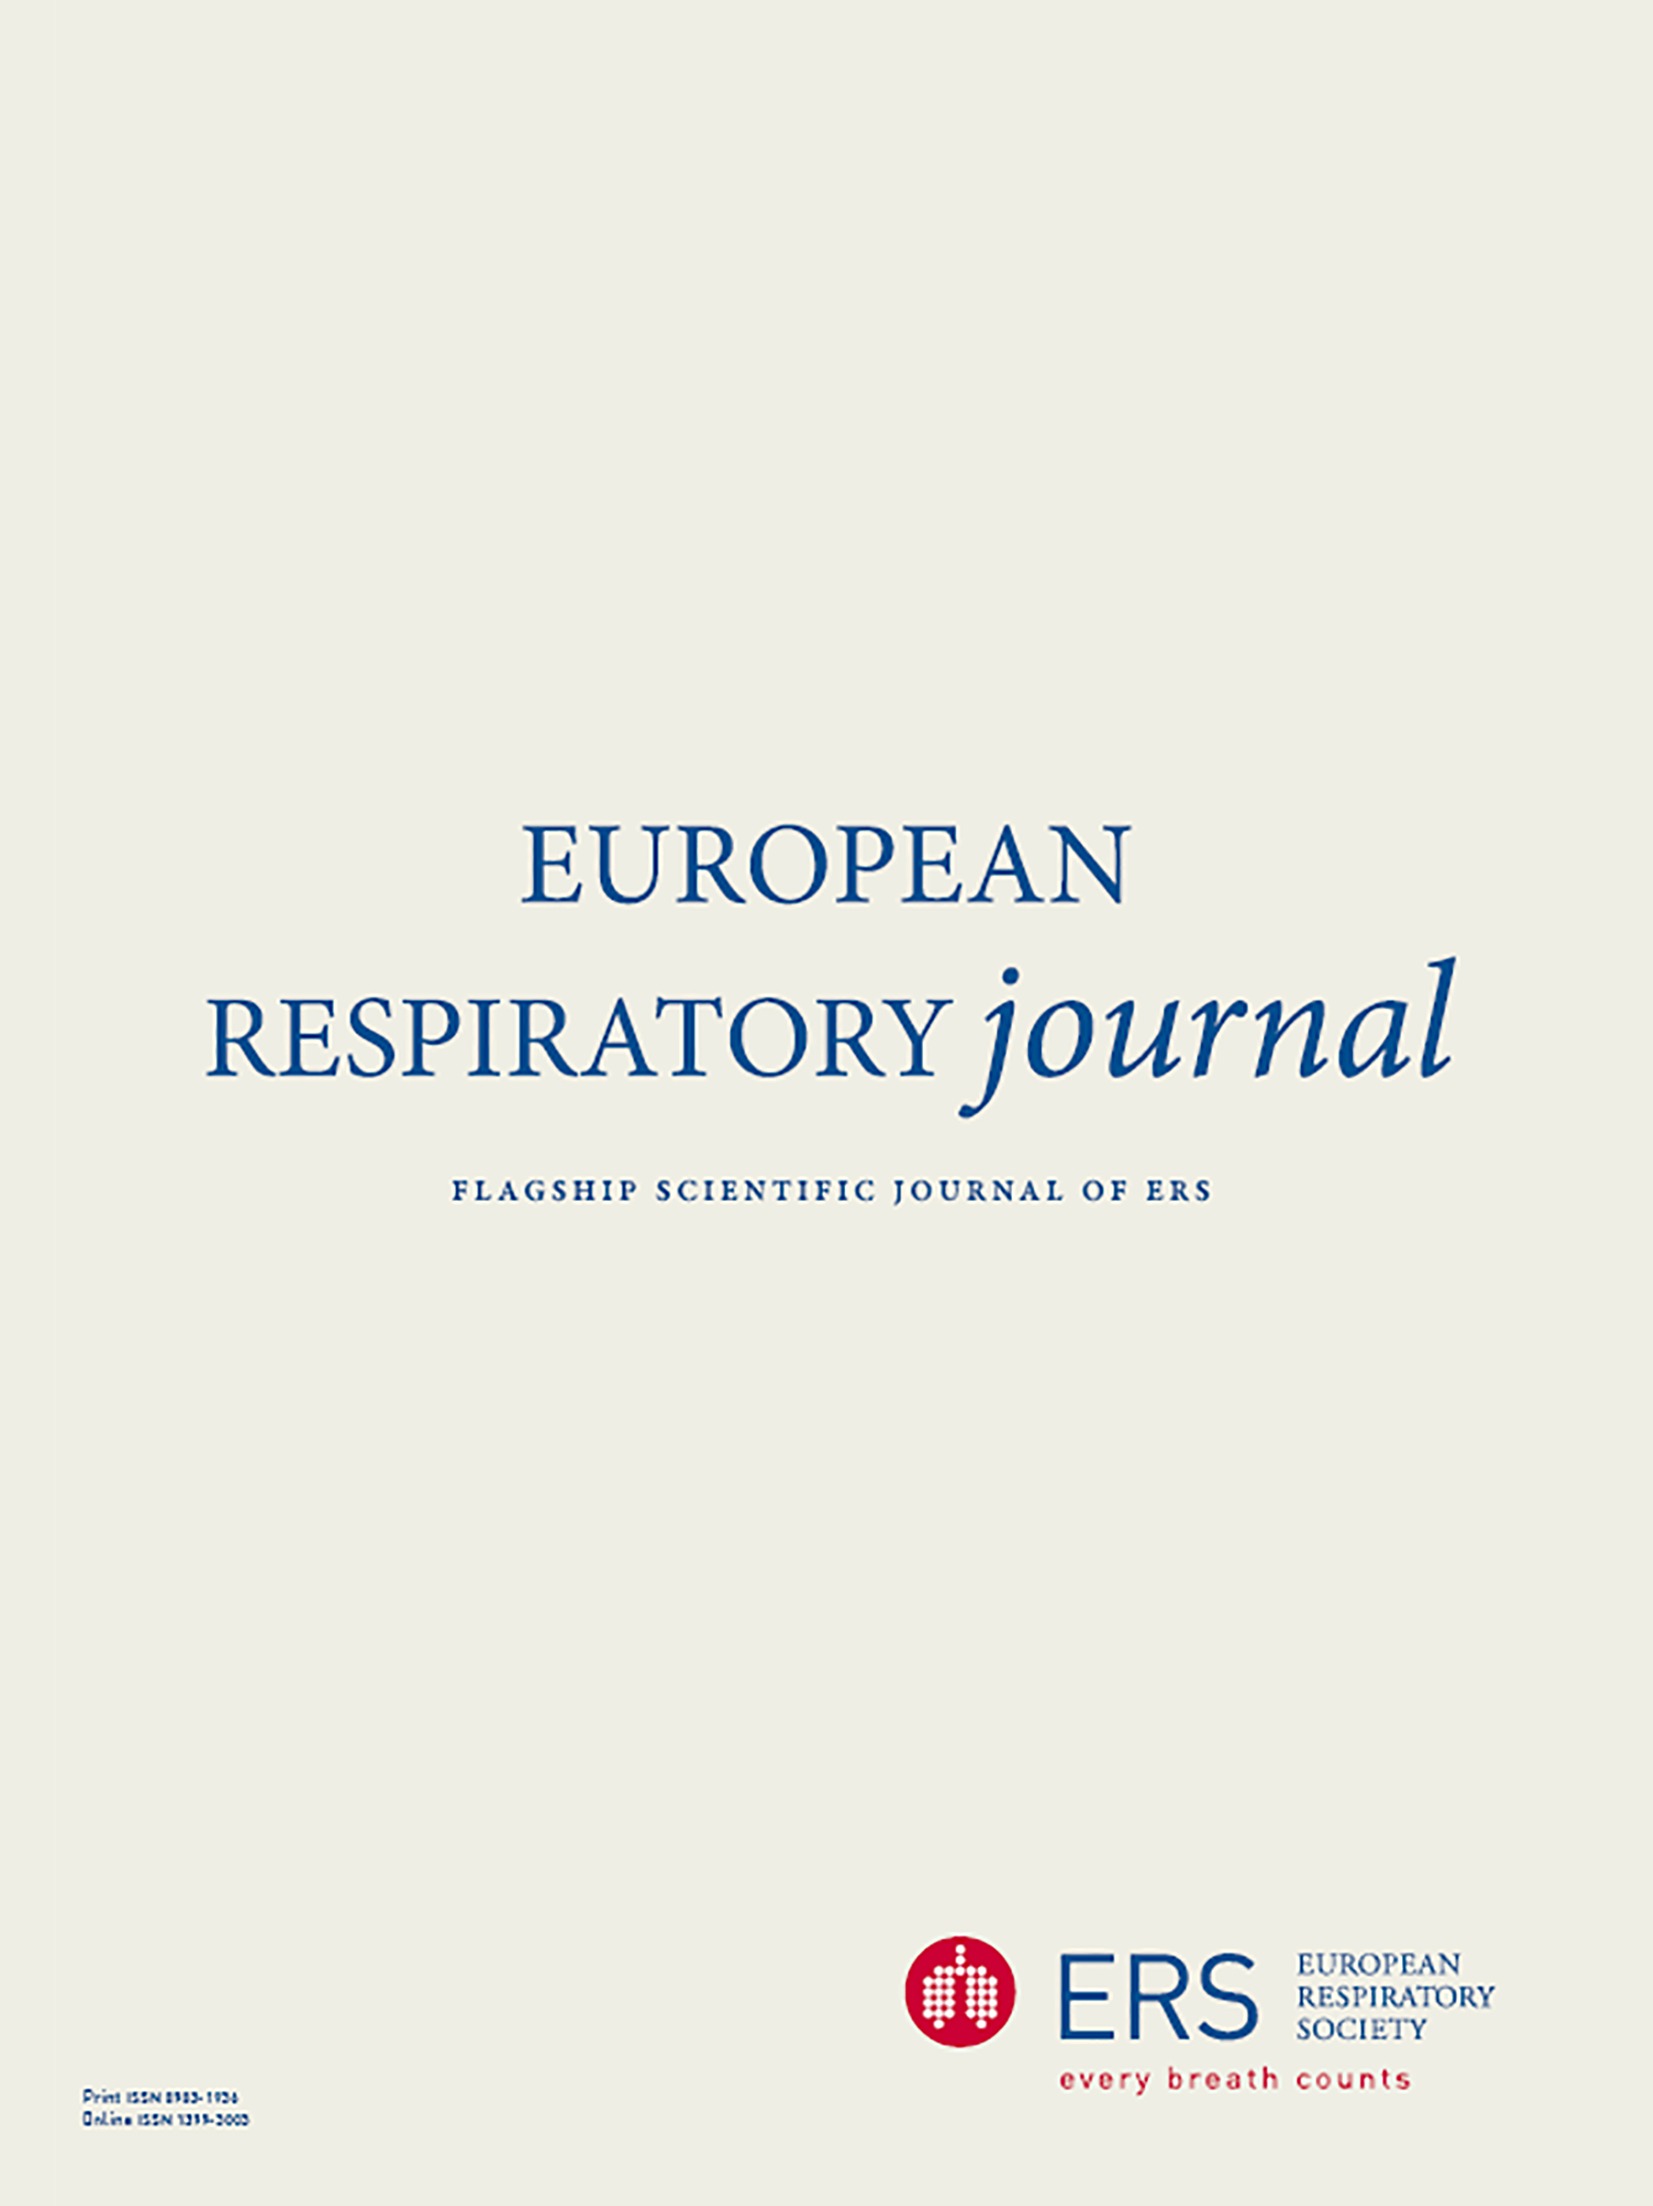 Telomere length and immunosuppression in non-idiopathic pulmonary fibrosis interstitial lung disease